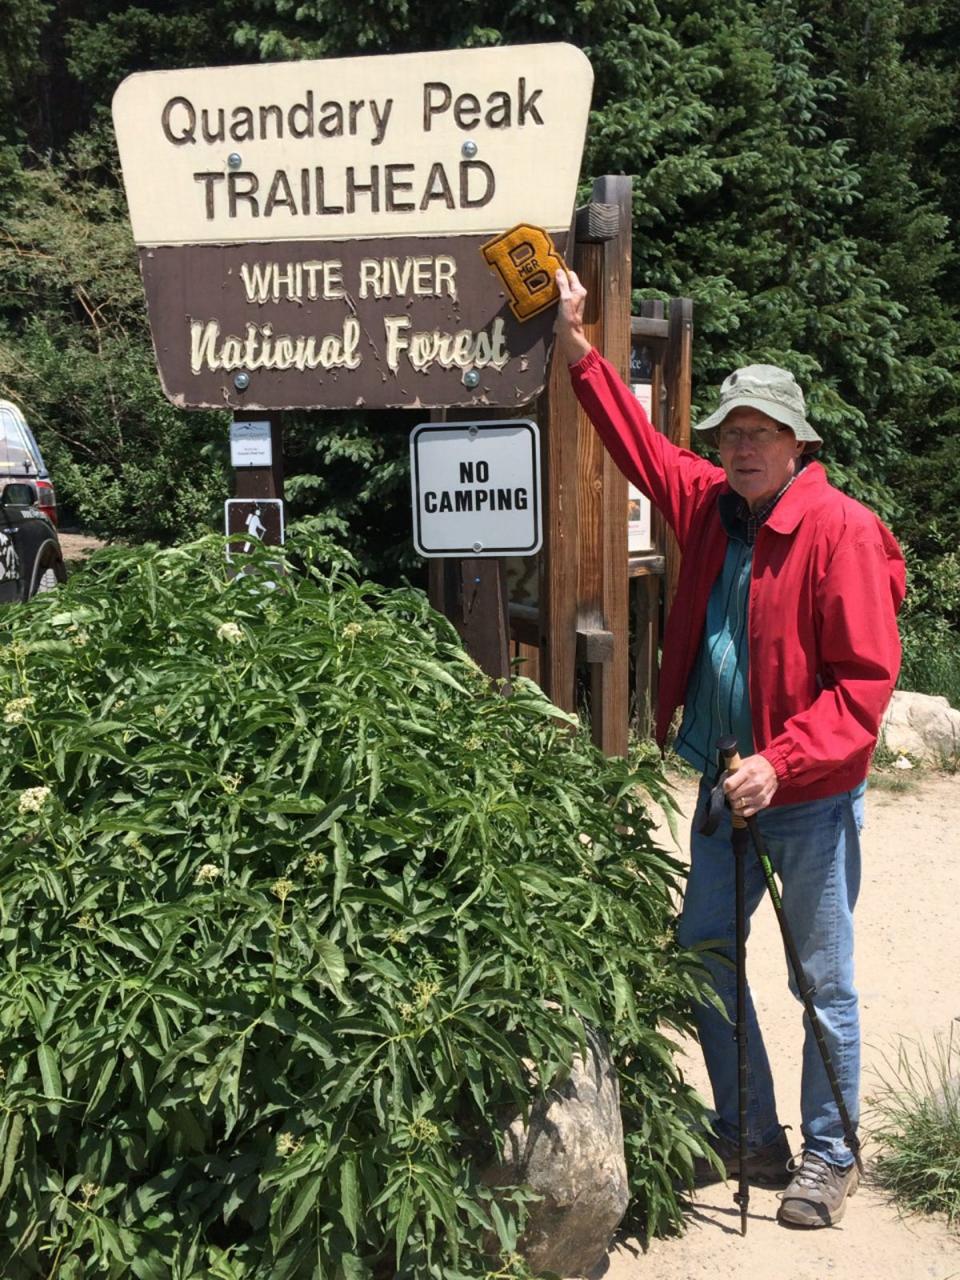 Bob Vernon at the Quadary Park trailhead in Colorado, one of the peaks he summited while preparing for a bid to set a record as the oldest person to scale Mount Kilimanjaro.